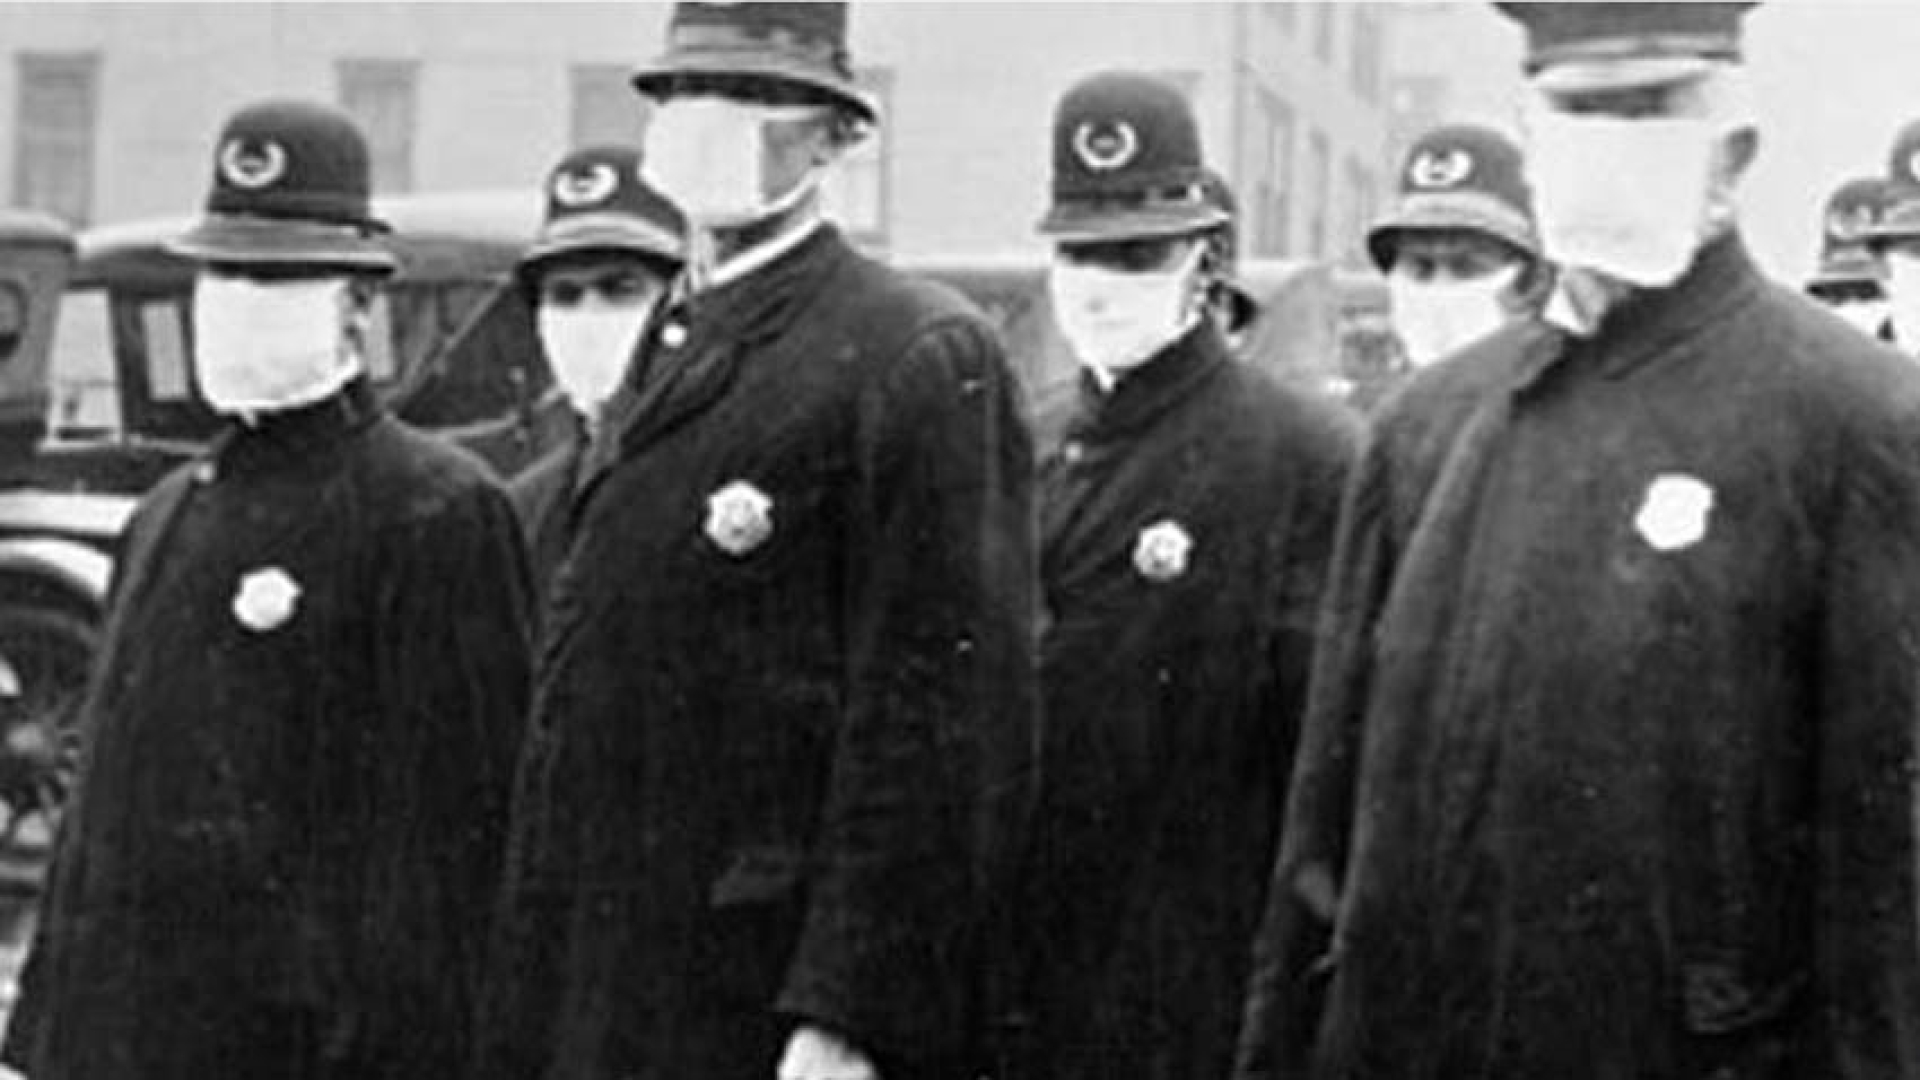 Mask Resistance a Pandemic Isn't New – in 1918 Many Americans Were 'Slackers'